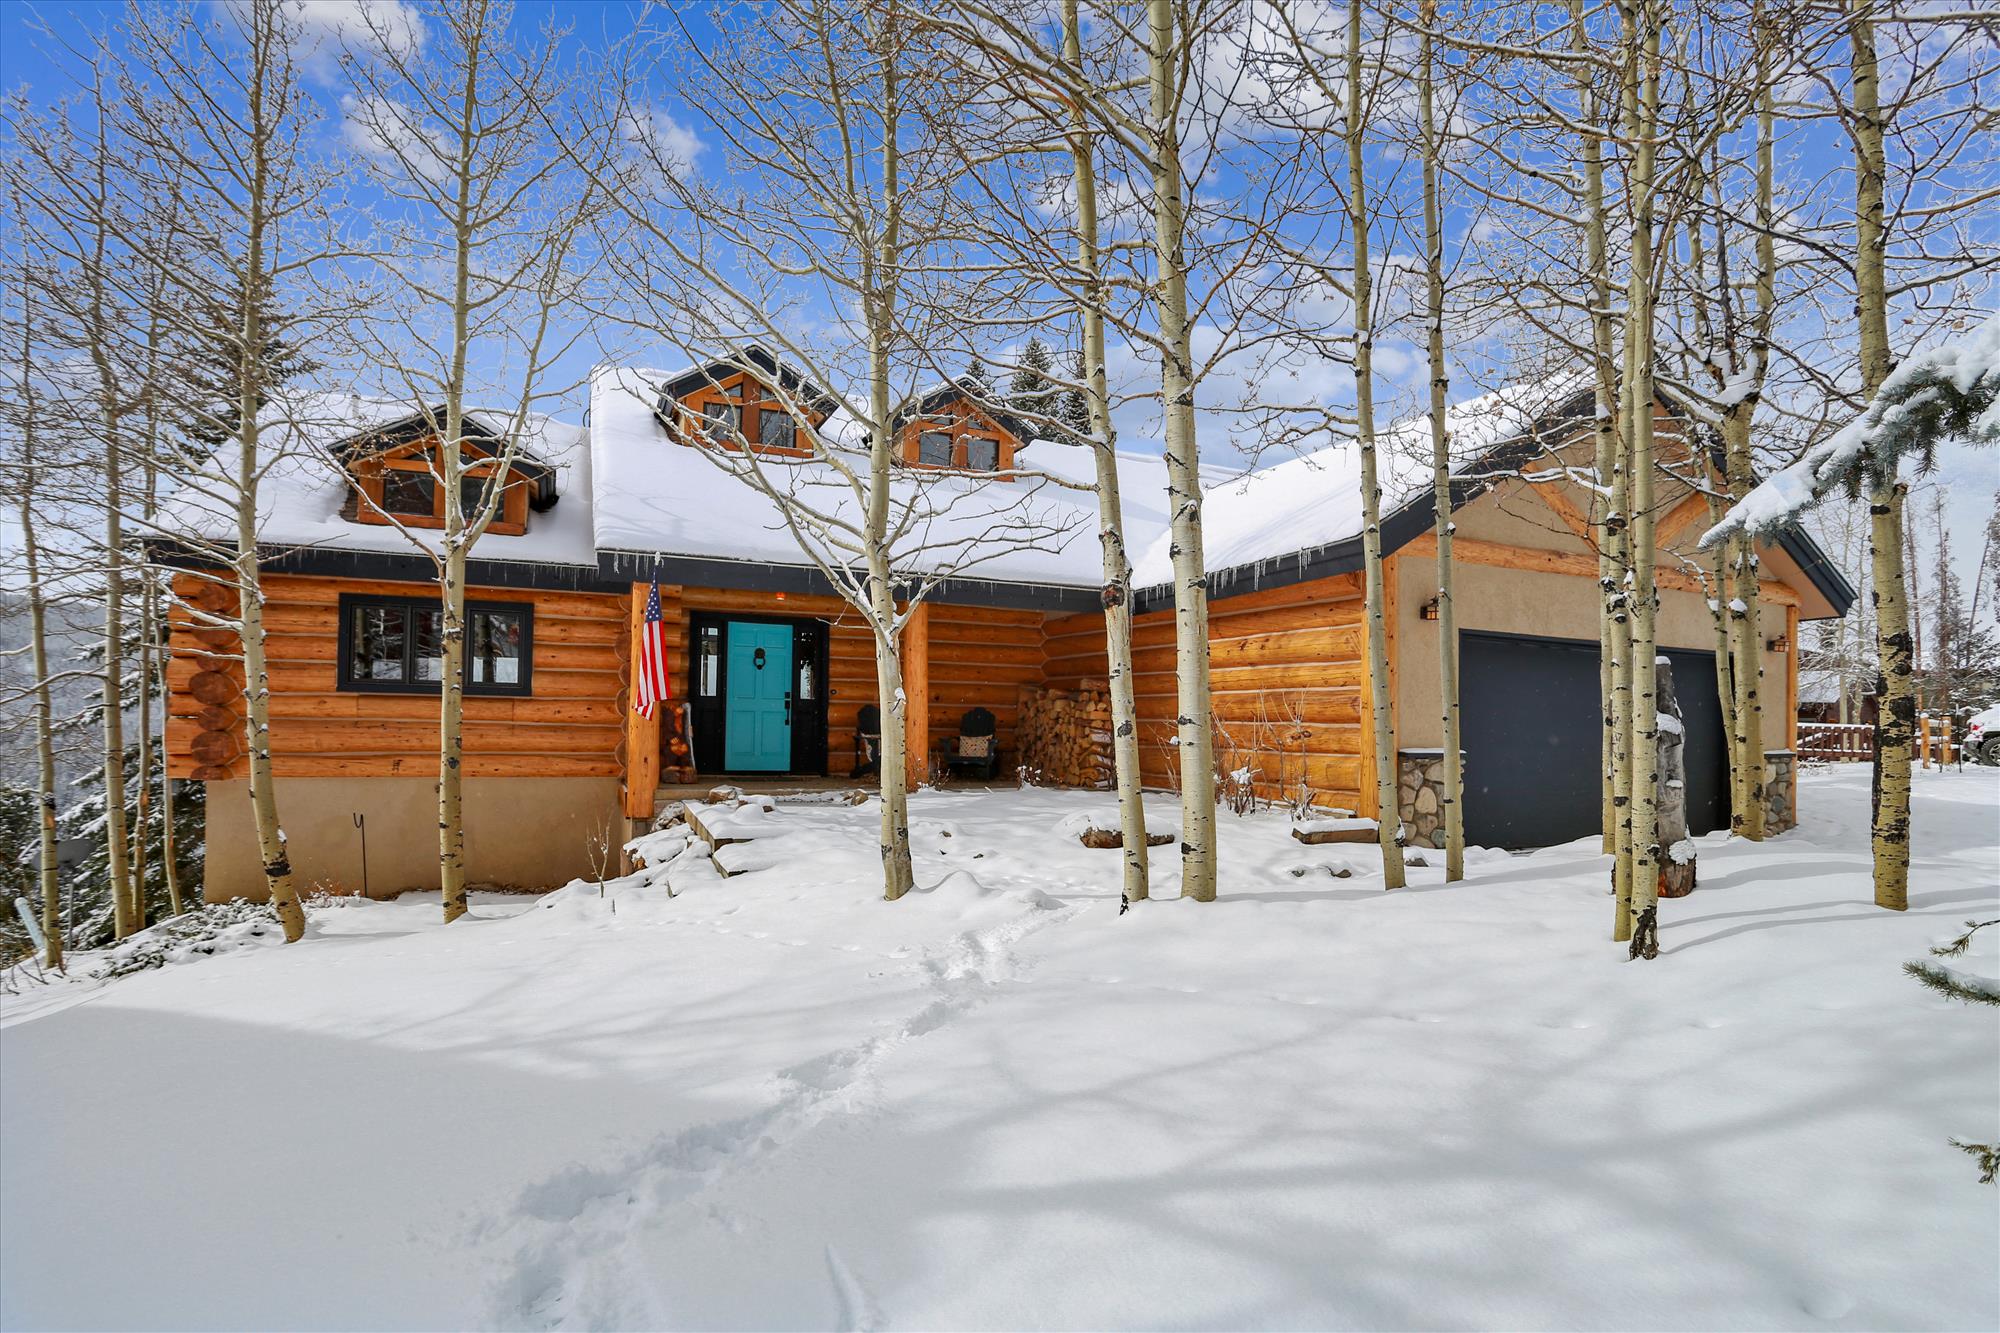 This beautiful secluded home will be the next destination of your dream vacation - 10 Southface Breckenridge Vacation Rental